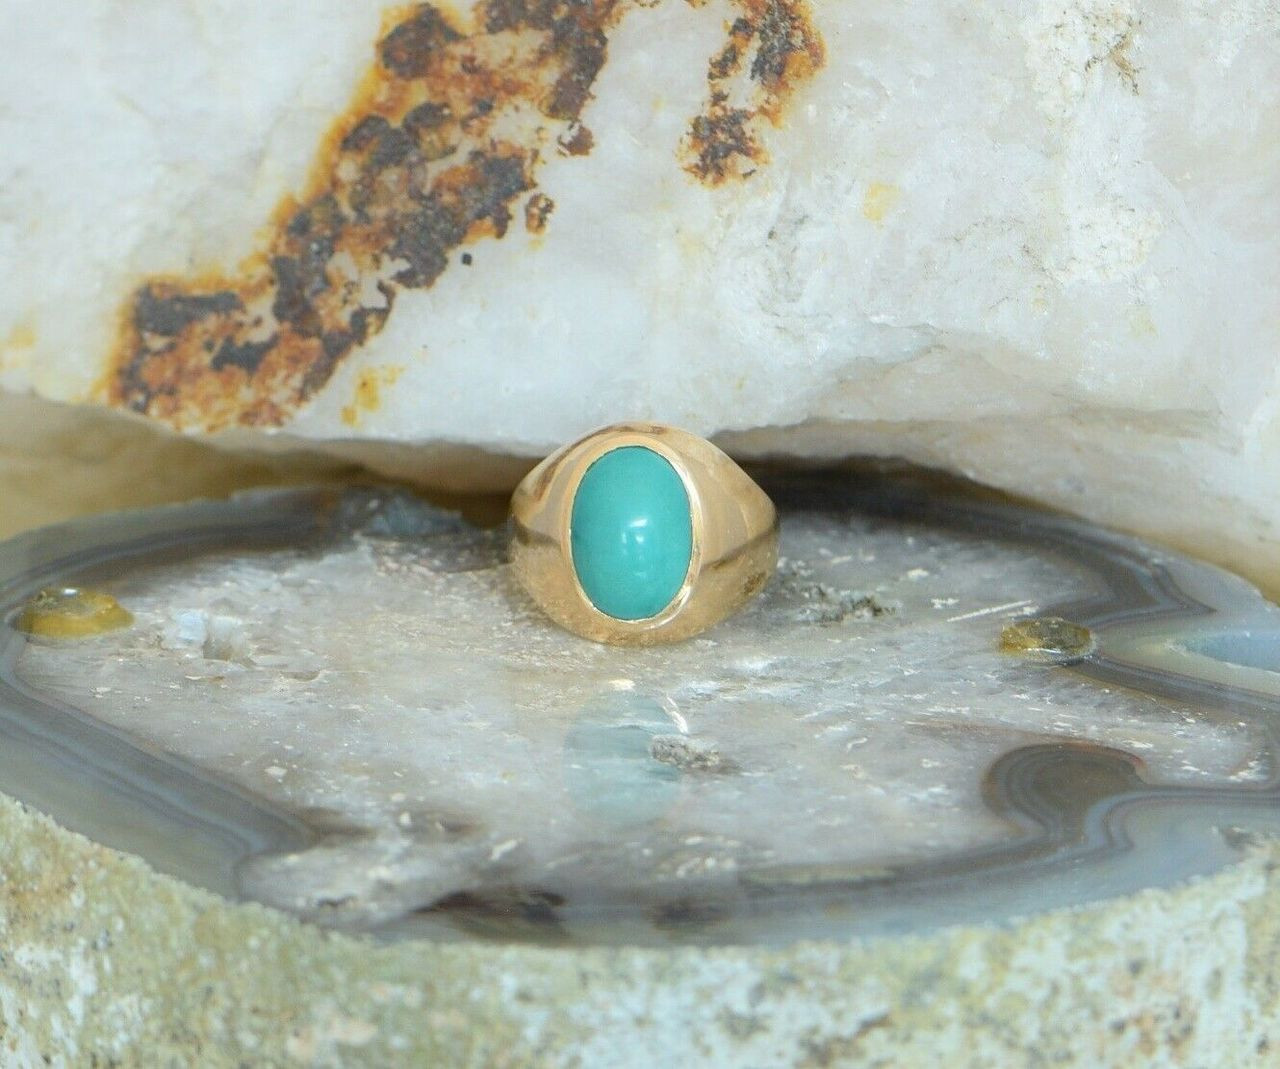 The Rose Gold Sierra | 3mm Rose Gold Titanium & Crushed Turquoise Ring